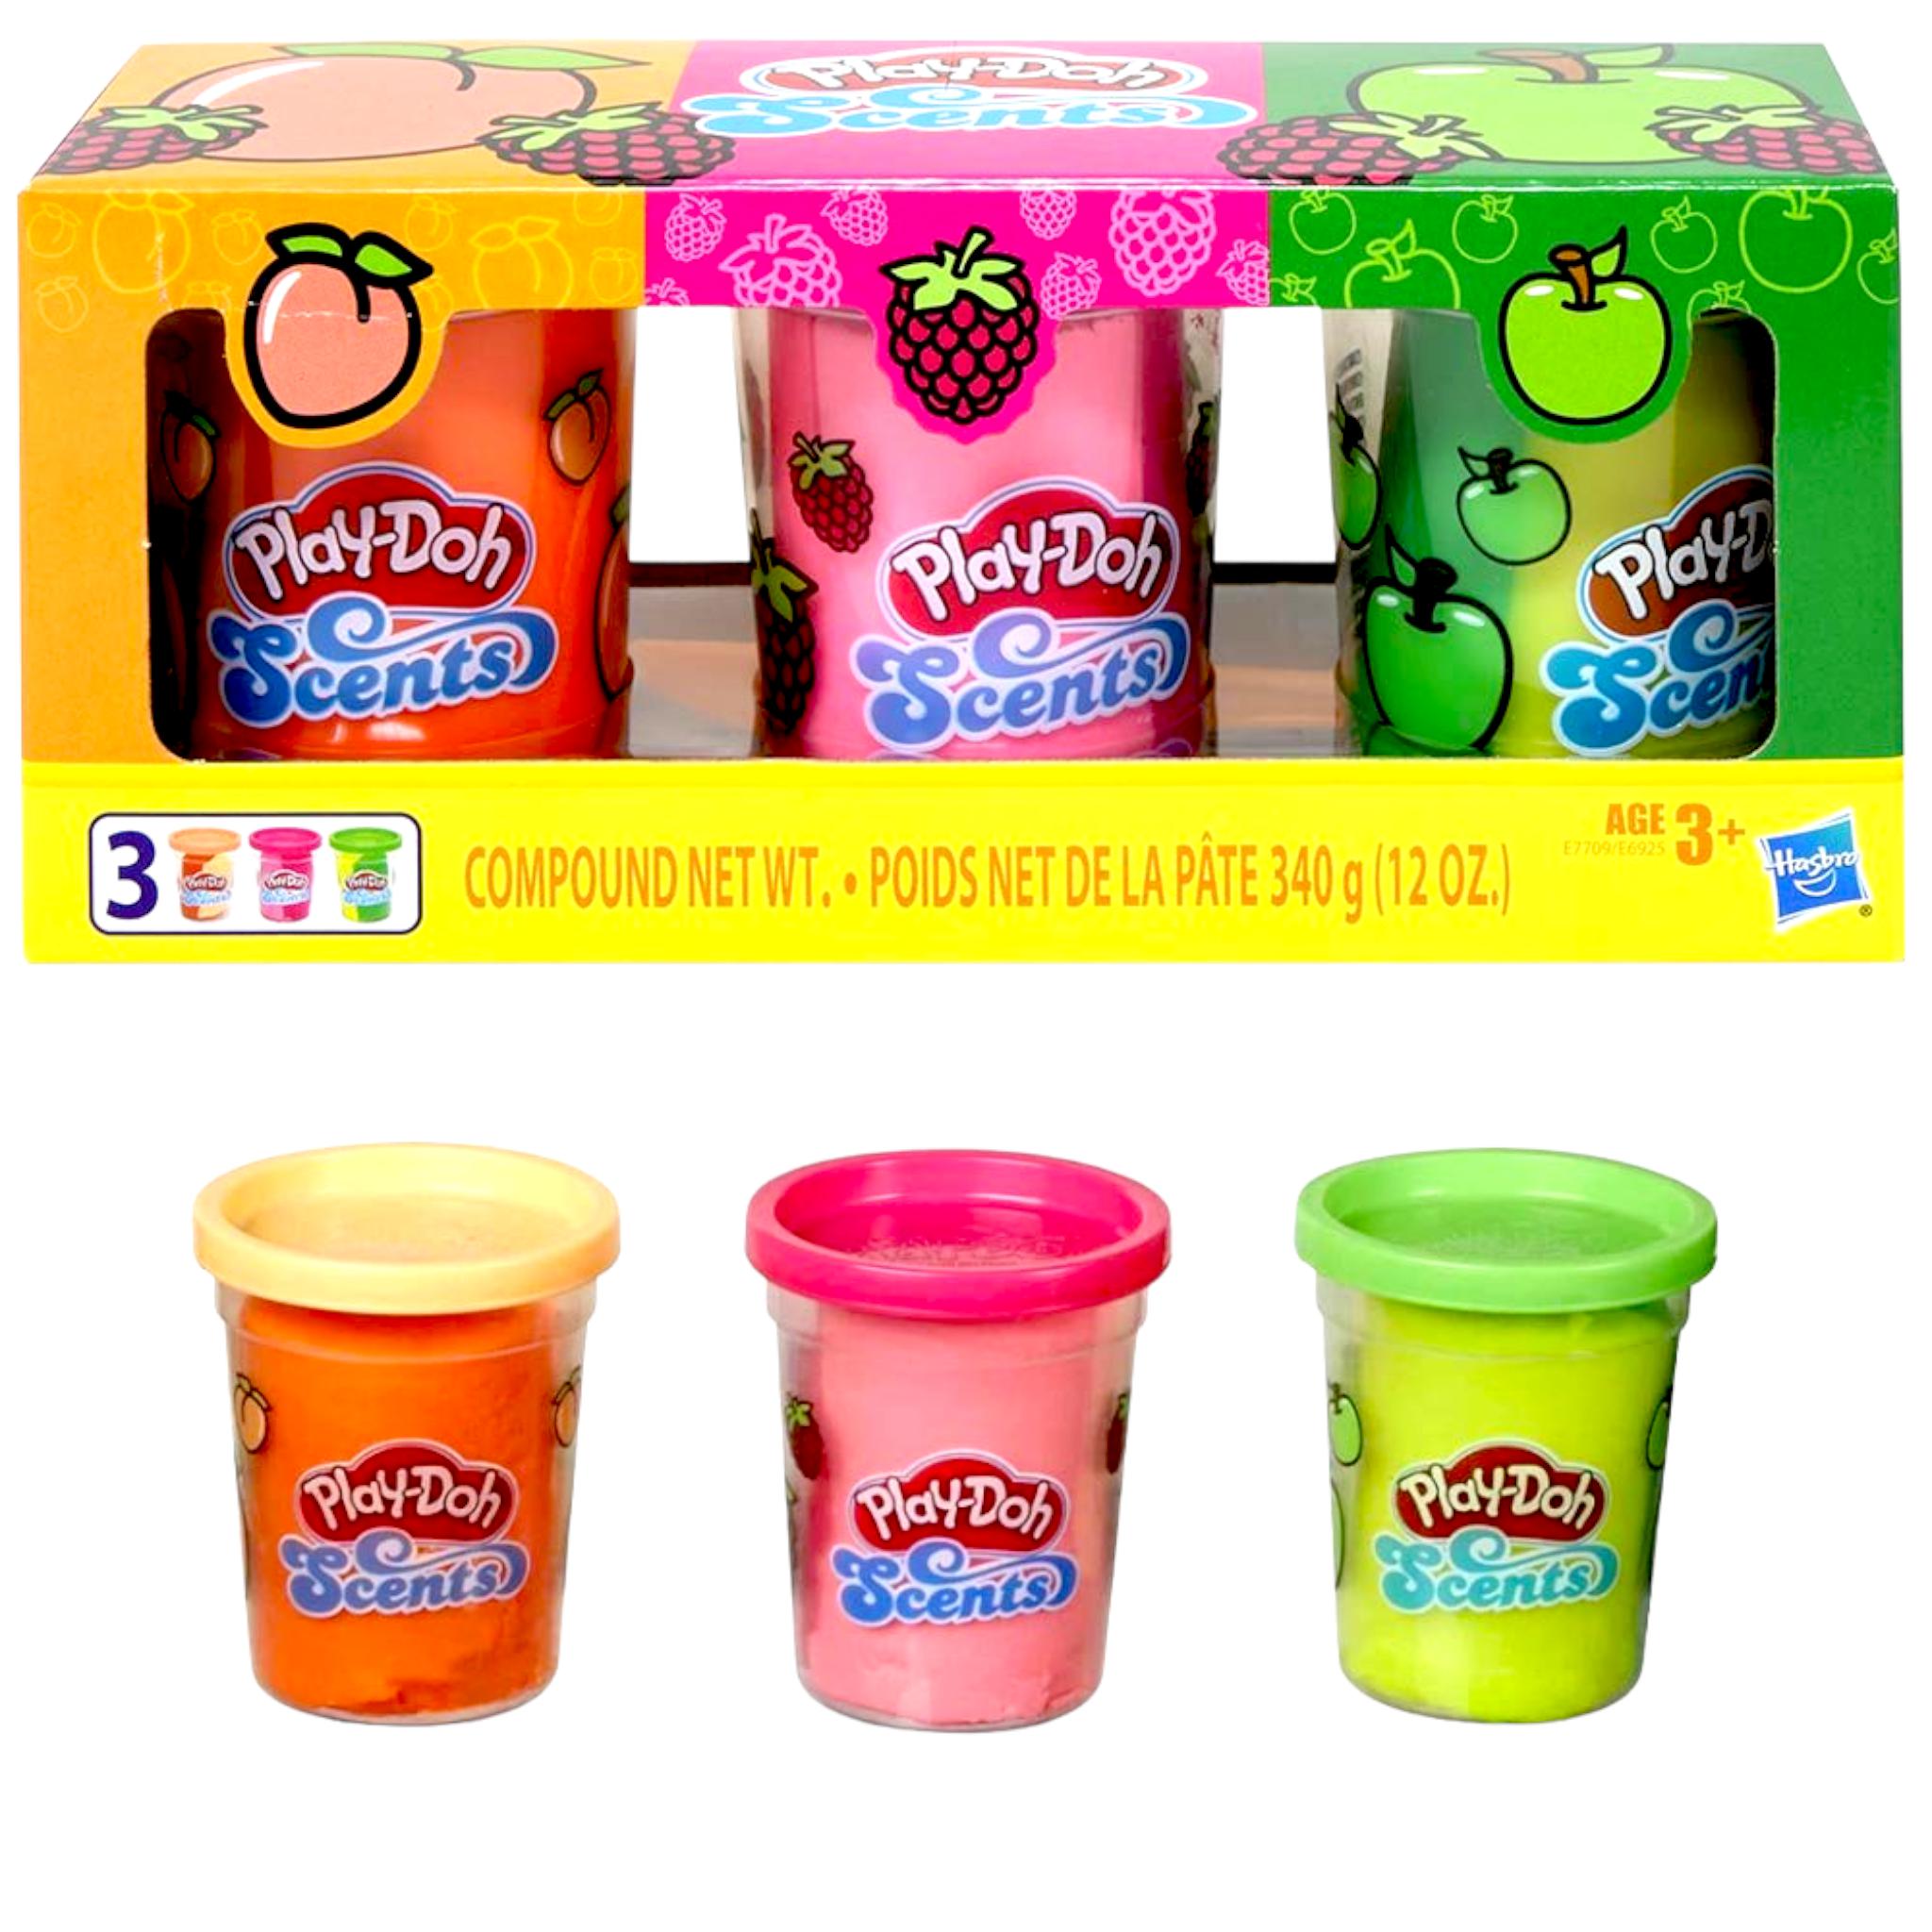 Play-Doh Scents 3-Pack of Non-Toxic Fruit Scented Modeling Compound